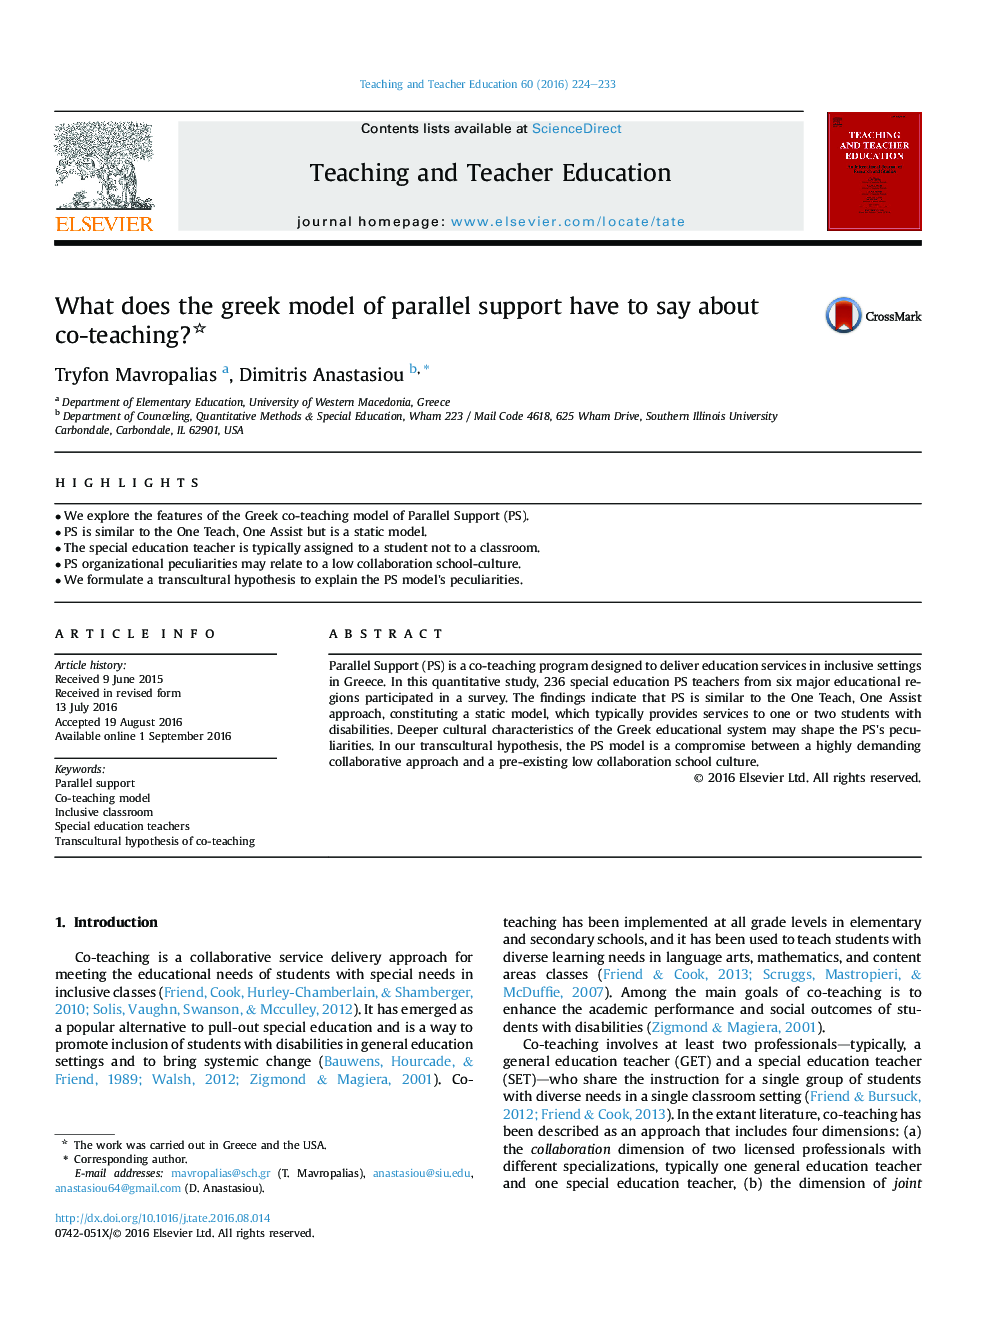 What does the greek model of parallel support have to say about co-teaching?